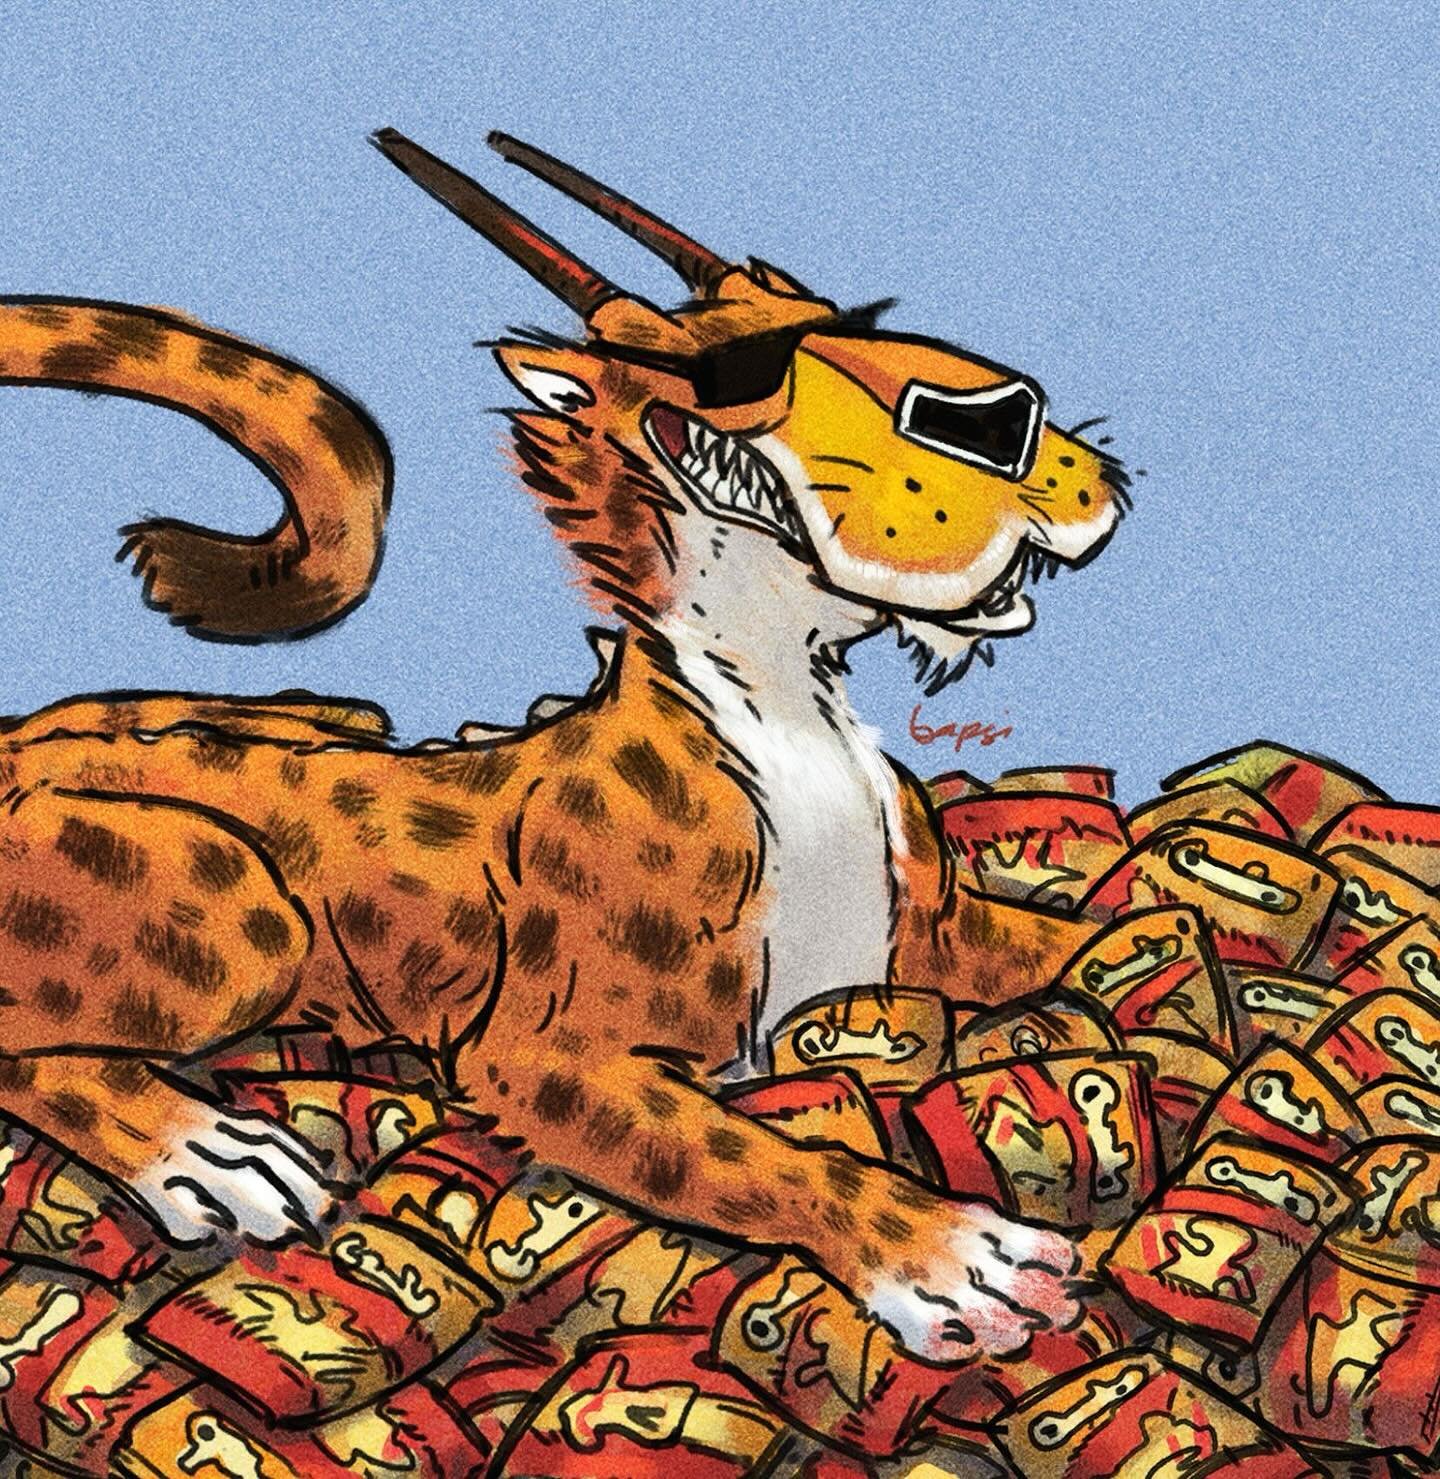 I just wanna say apropos of very little that I almost never ran the mile in high school. anyway if you want my cheeto dragon hoard illustration on something tangible, this is in my shop https://society6.com/art/hot-cheeto-dragons-hoard